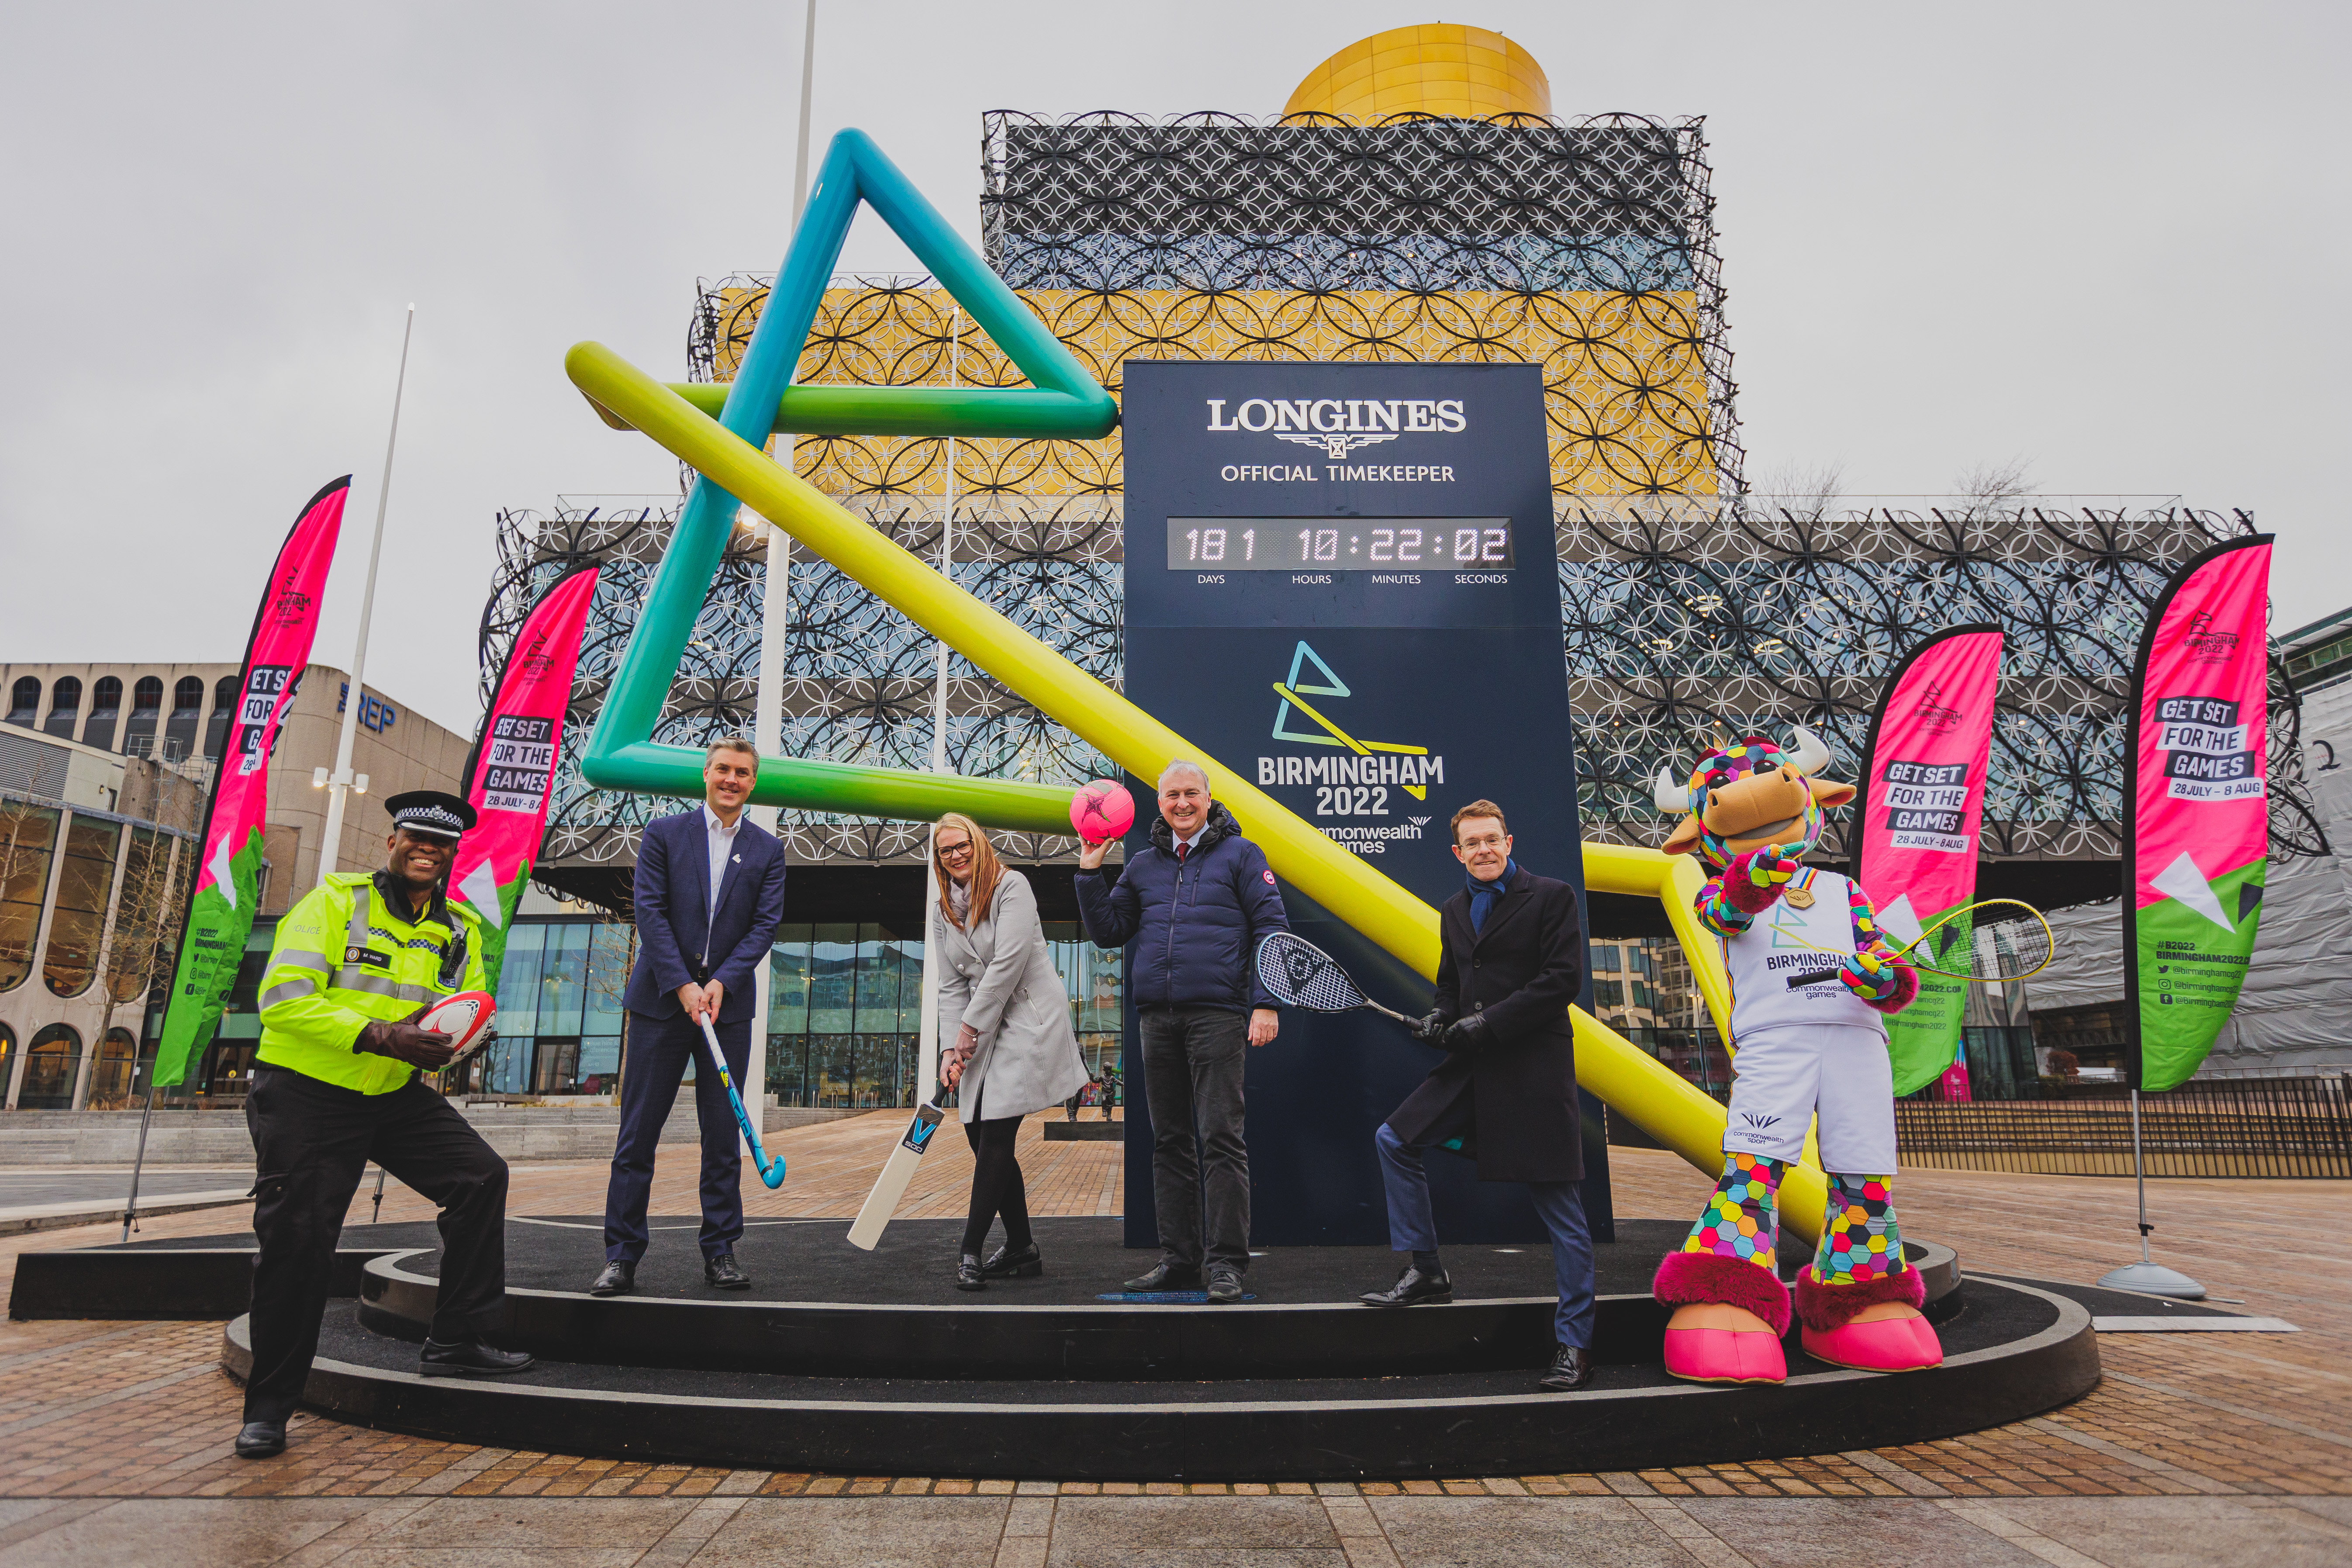 ACC Matt Ward, West Midlands Police, Birmingham 2022 Chief Executive Ian Reid, Anne Shaw, executive director TfWM, Cllr Ian Ward, leader of Birmingham City Council, Mayor of the West Midlands Andy Street - launched the Get Set campaign in January